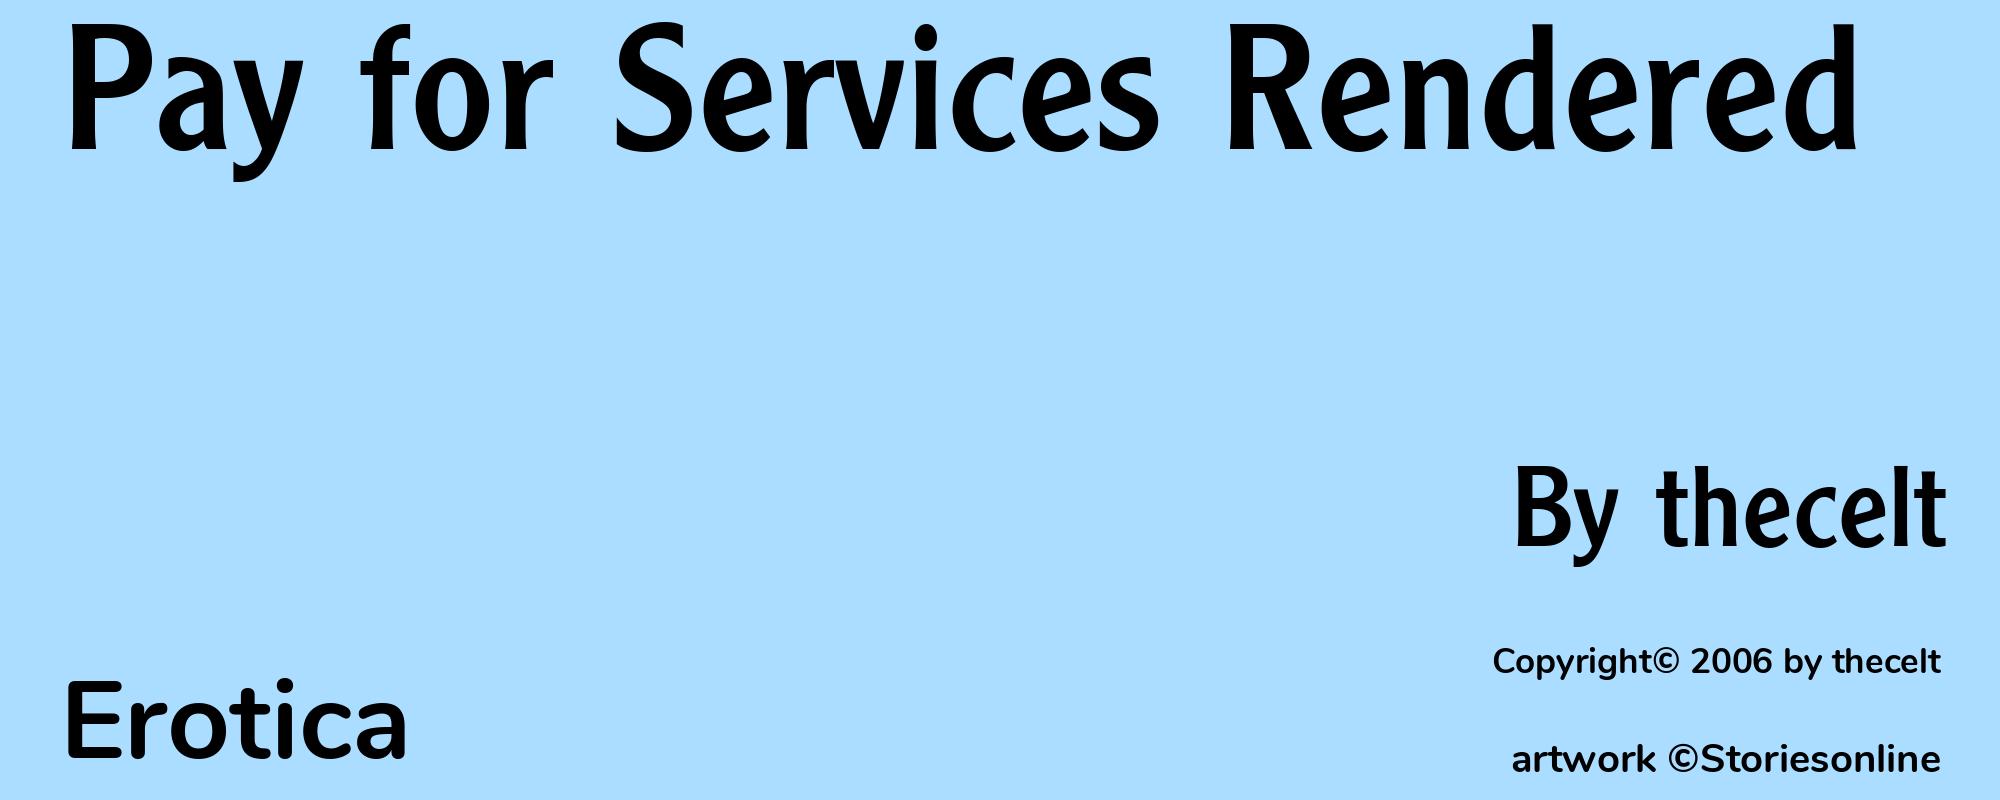 Pay for Services Rendered - Cover